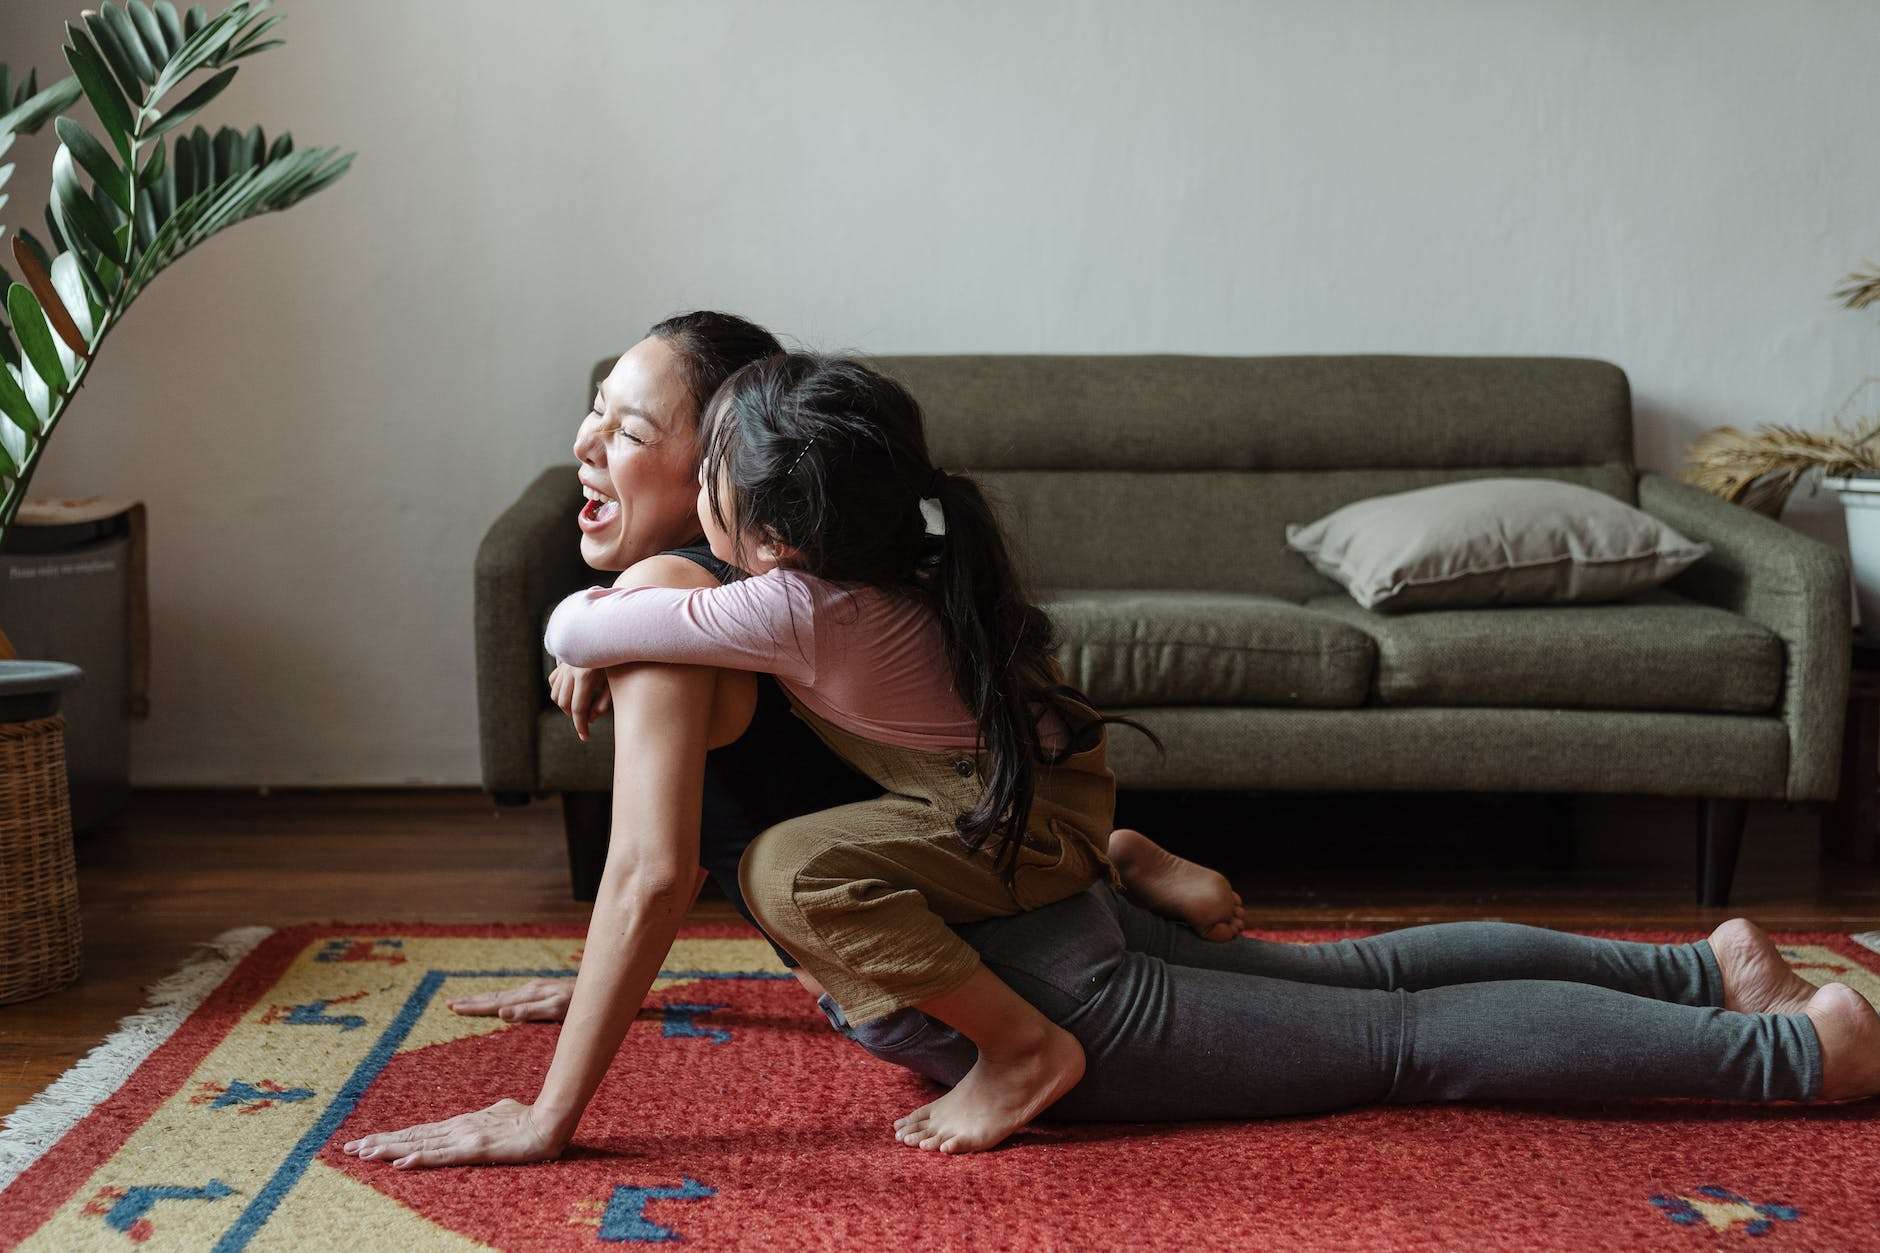 photo of girl hugging a woman while doing yoga pose: homeschooling with confidence requires flexibility